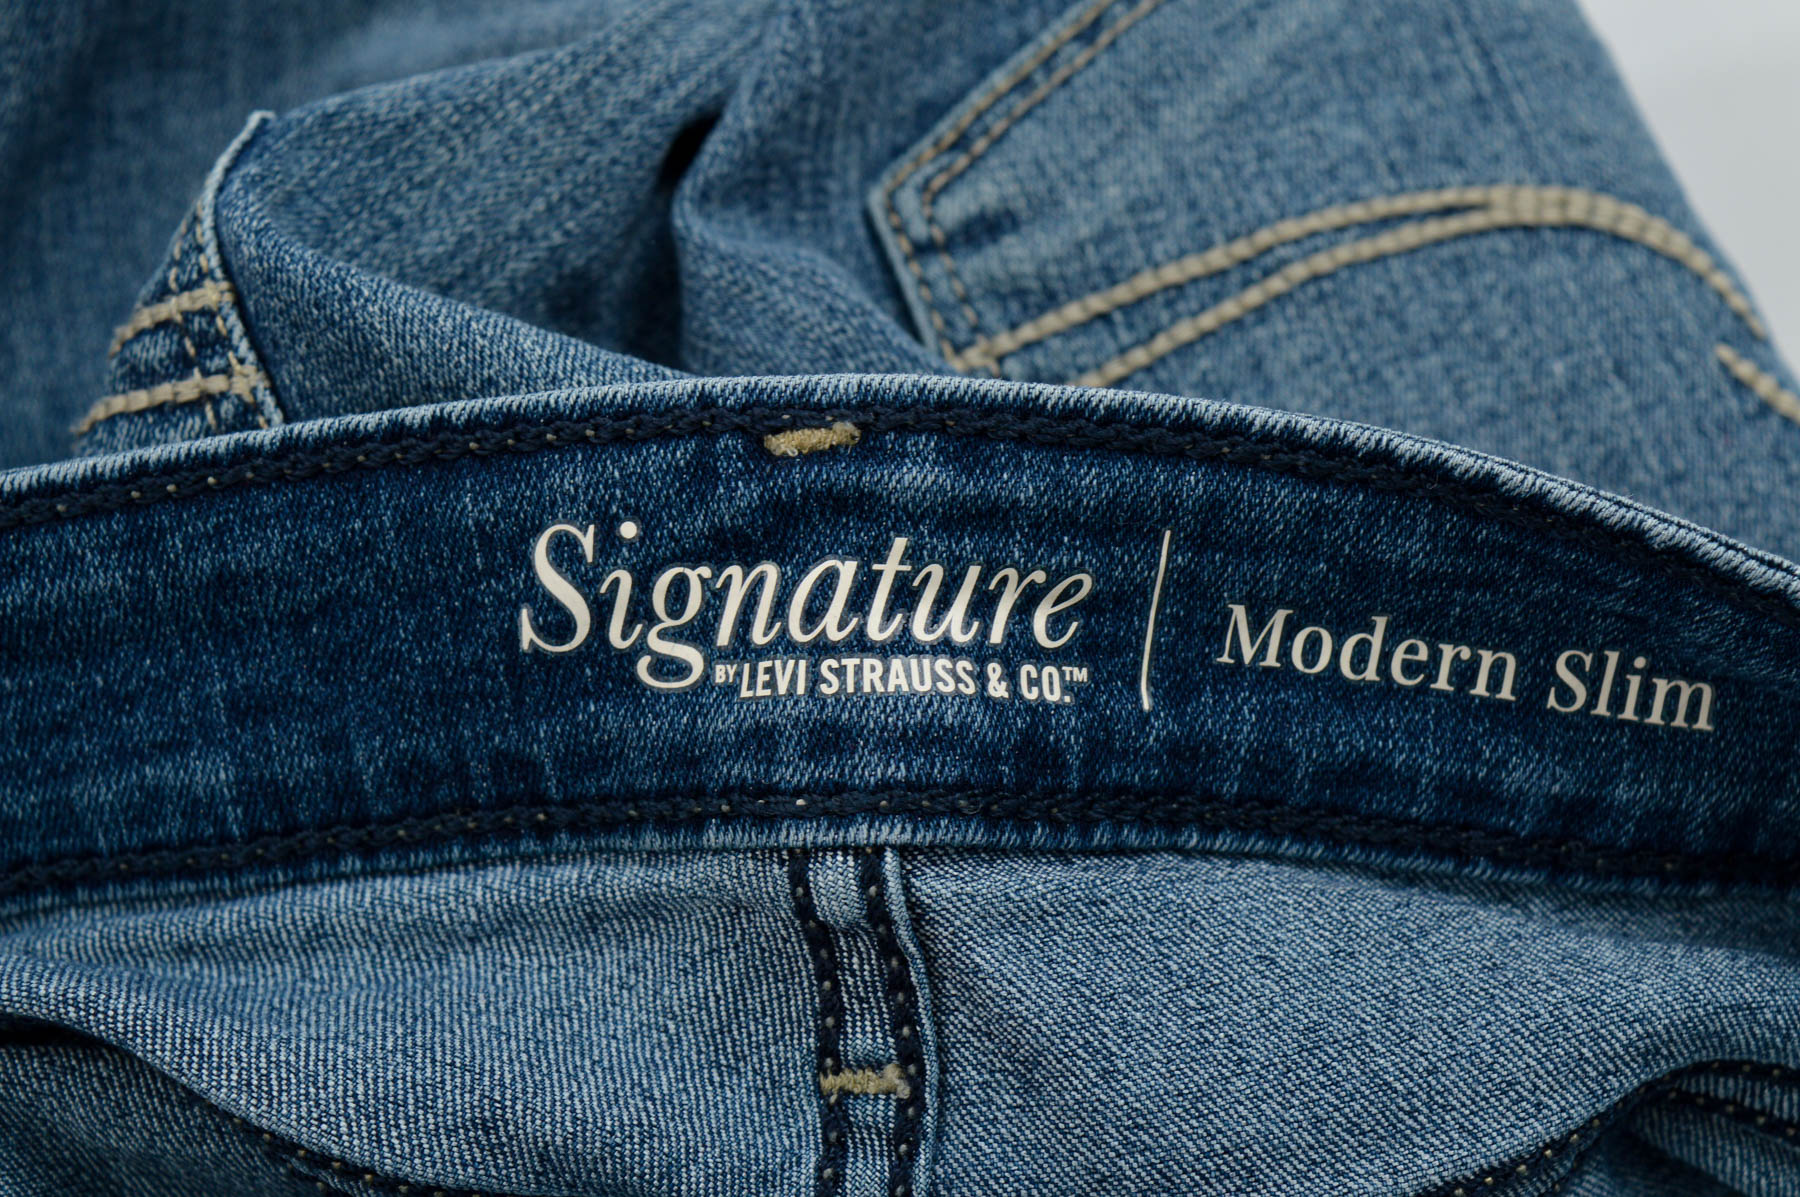 Women's jeans - SIGNATURE BY LEVI STRAUSS & CO. - 2